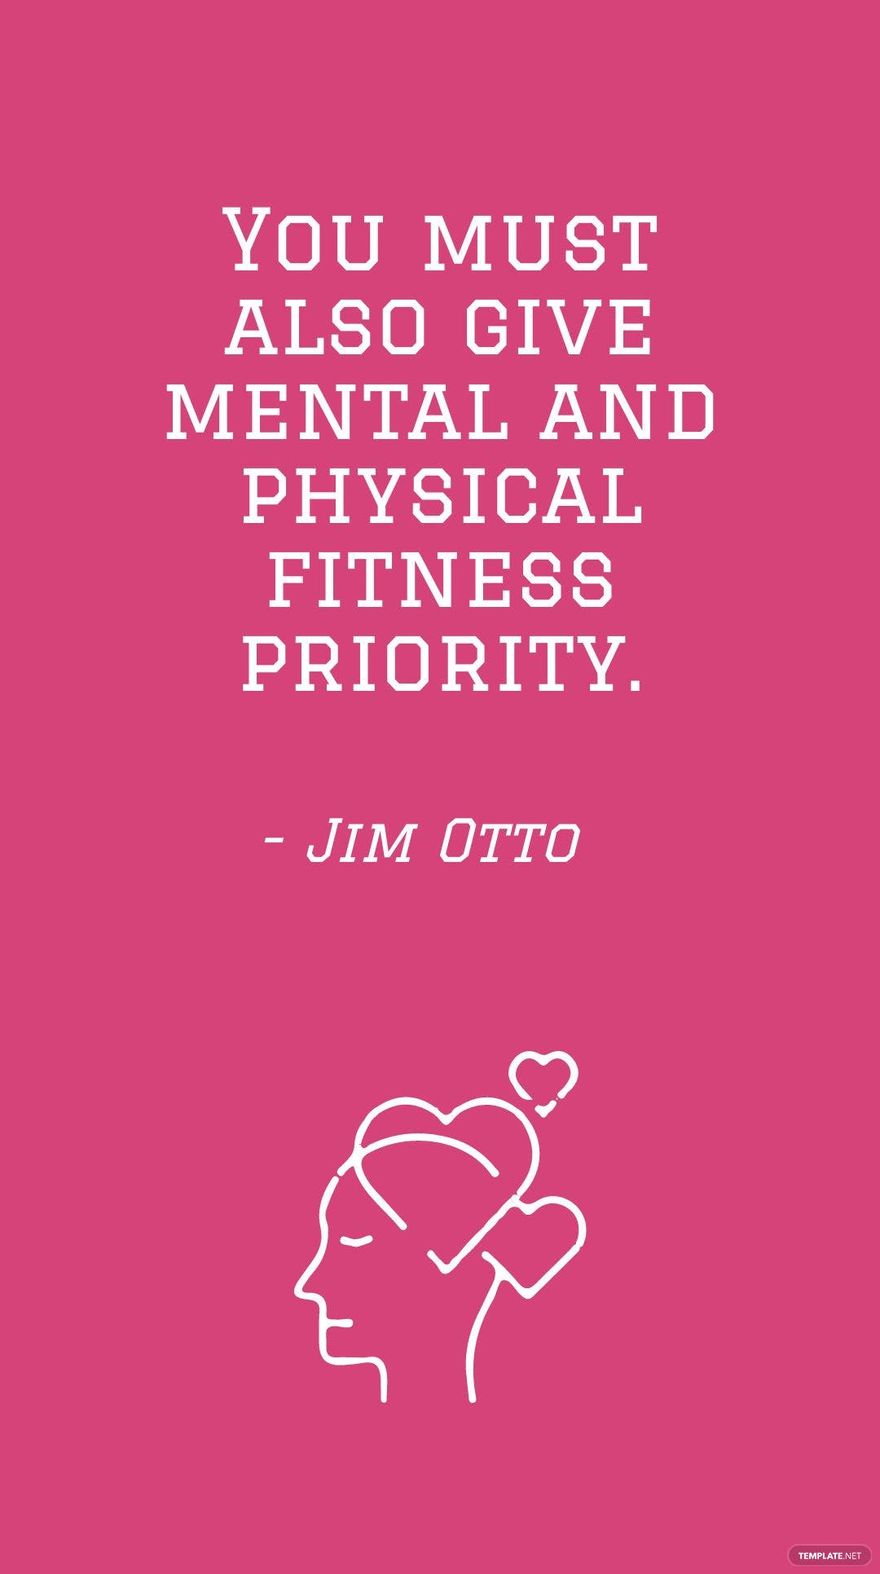 Free Jim Otto - You must also give mental and physical fitness priority. in JPG